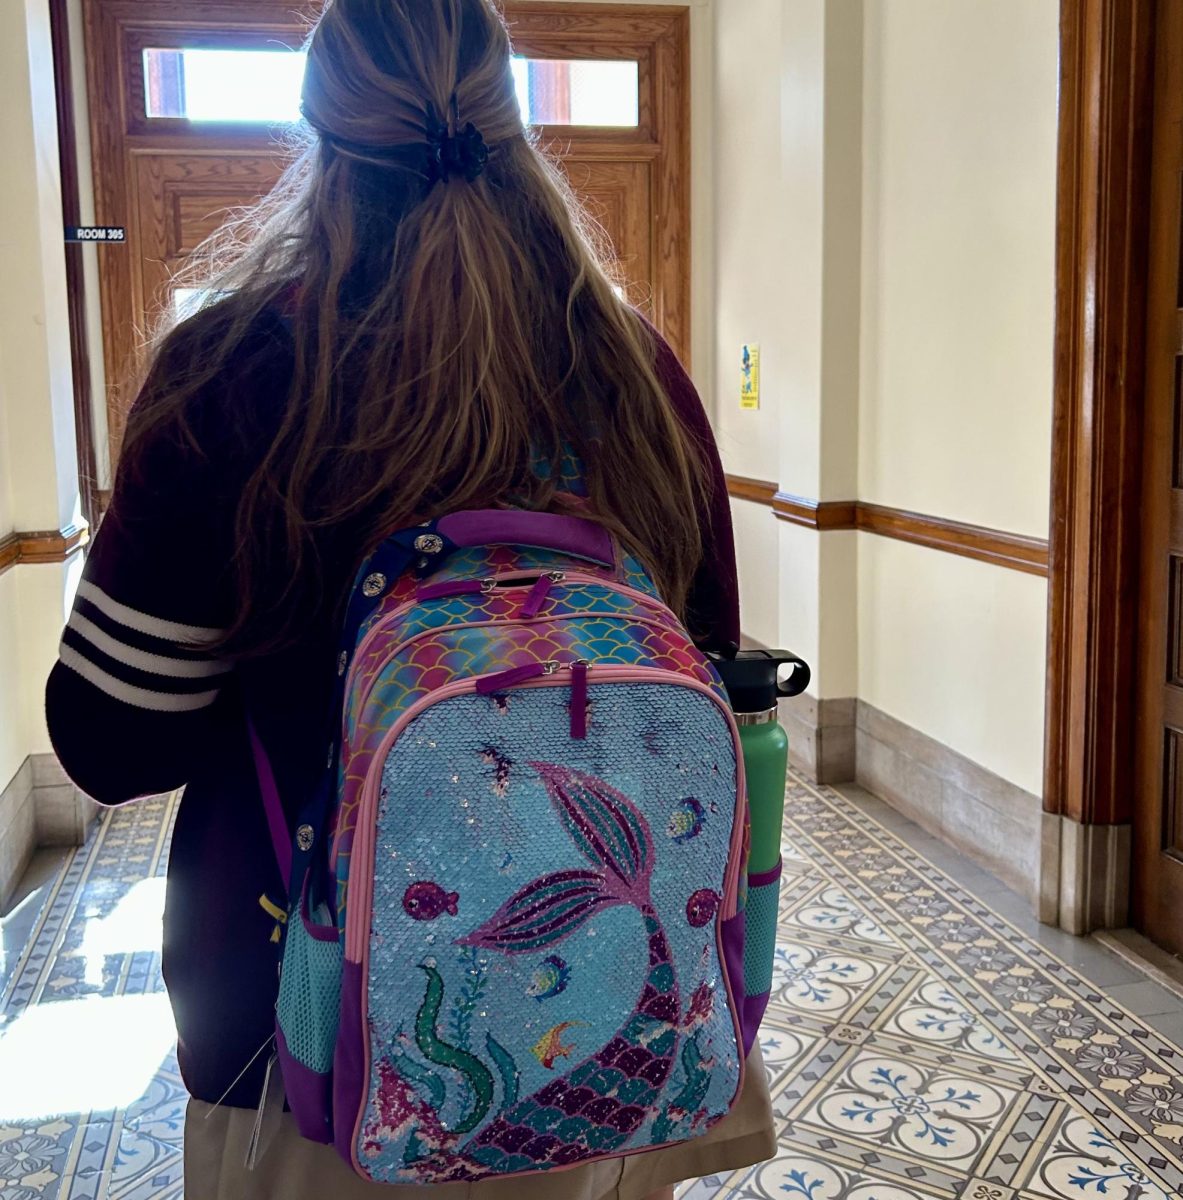 Abigail Villa 24 showing off her mermaid sequin backpack.